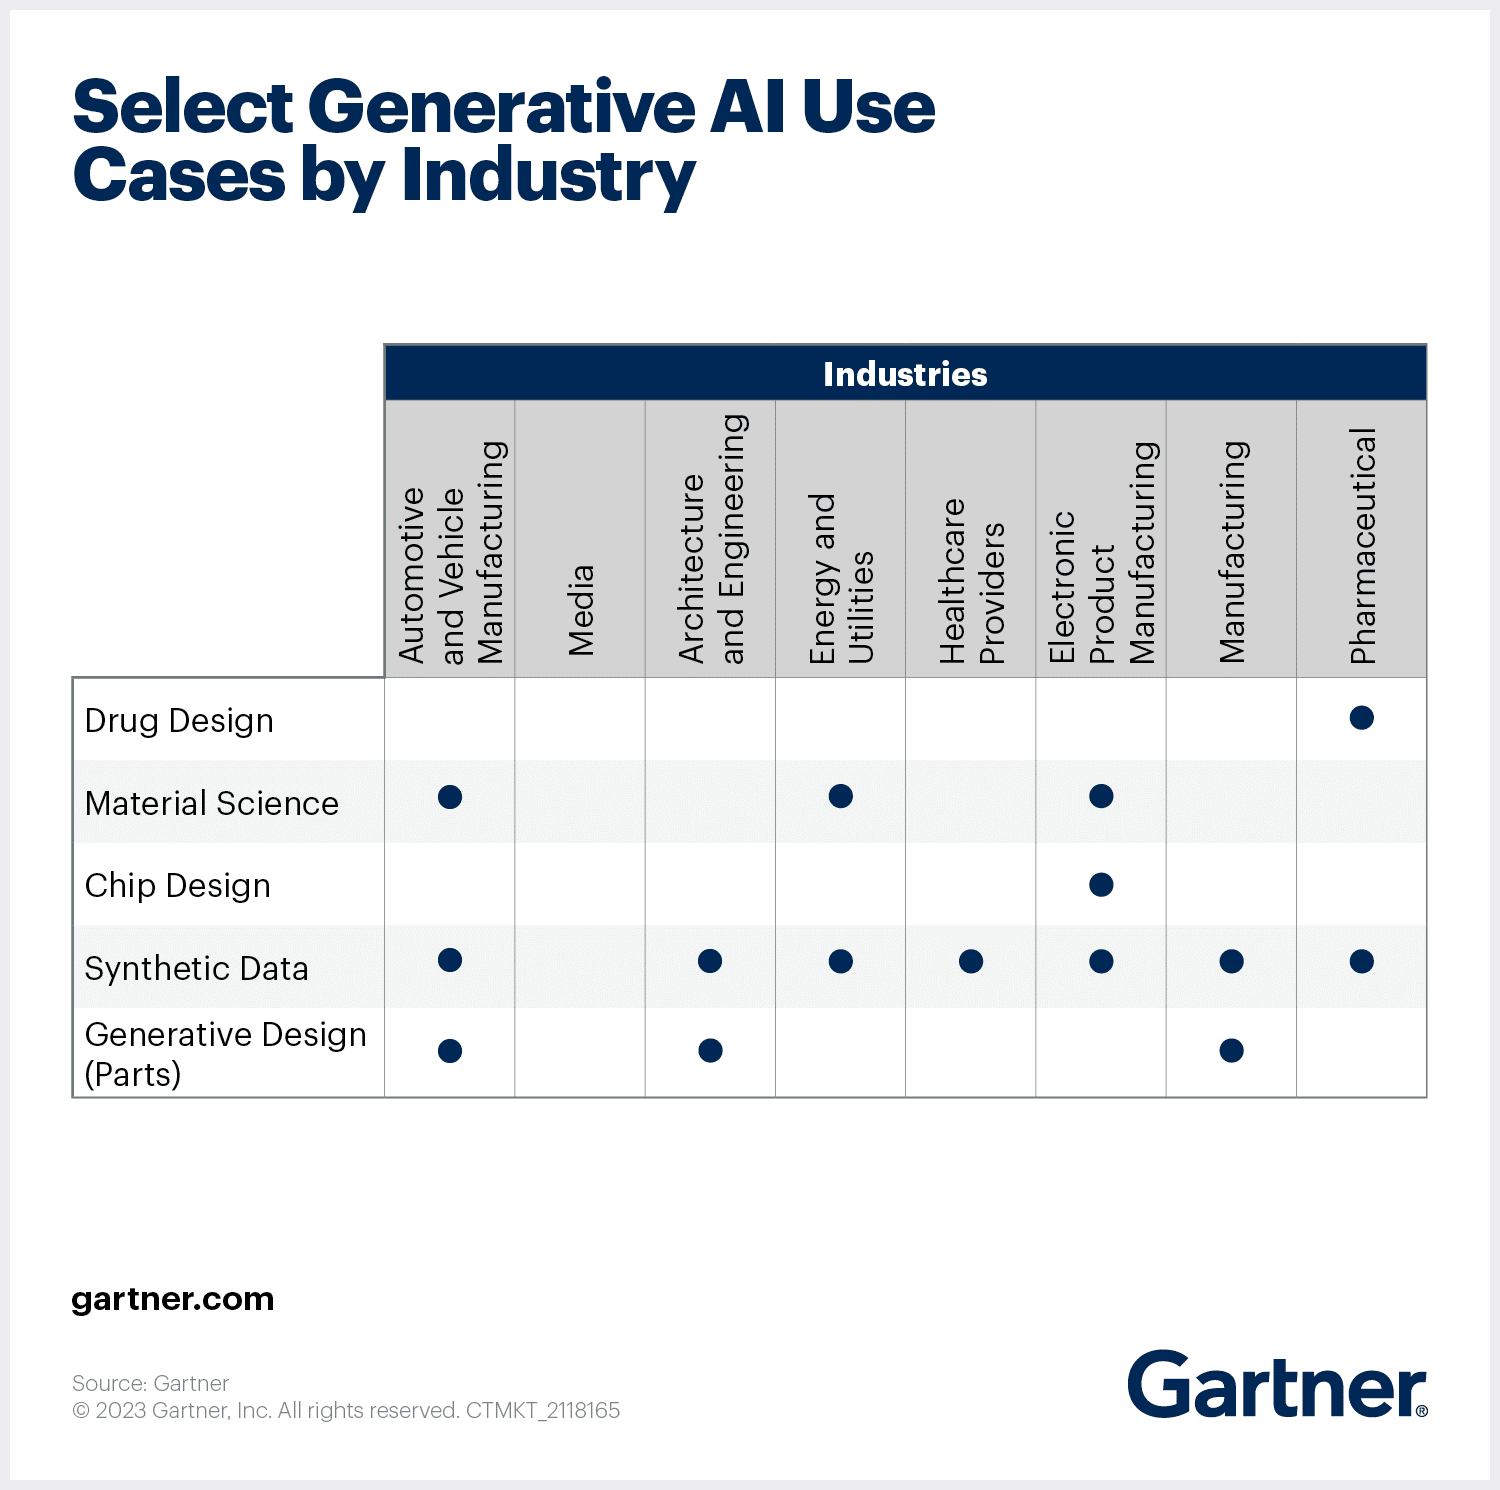 Select-Generative-AI-Use-Cases-By-Industry-1.png